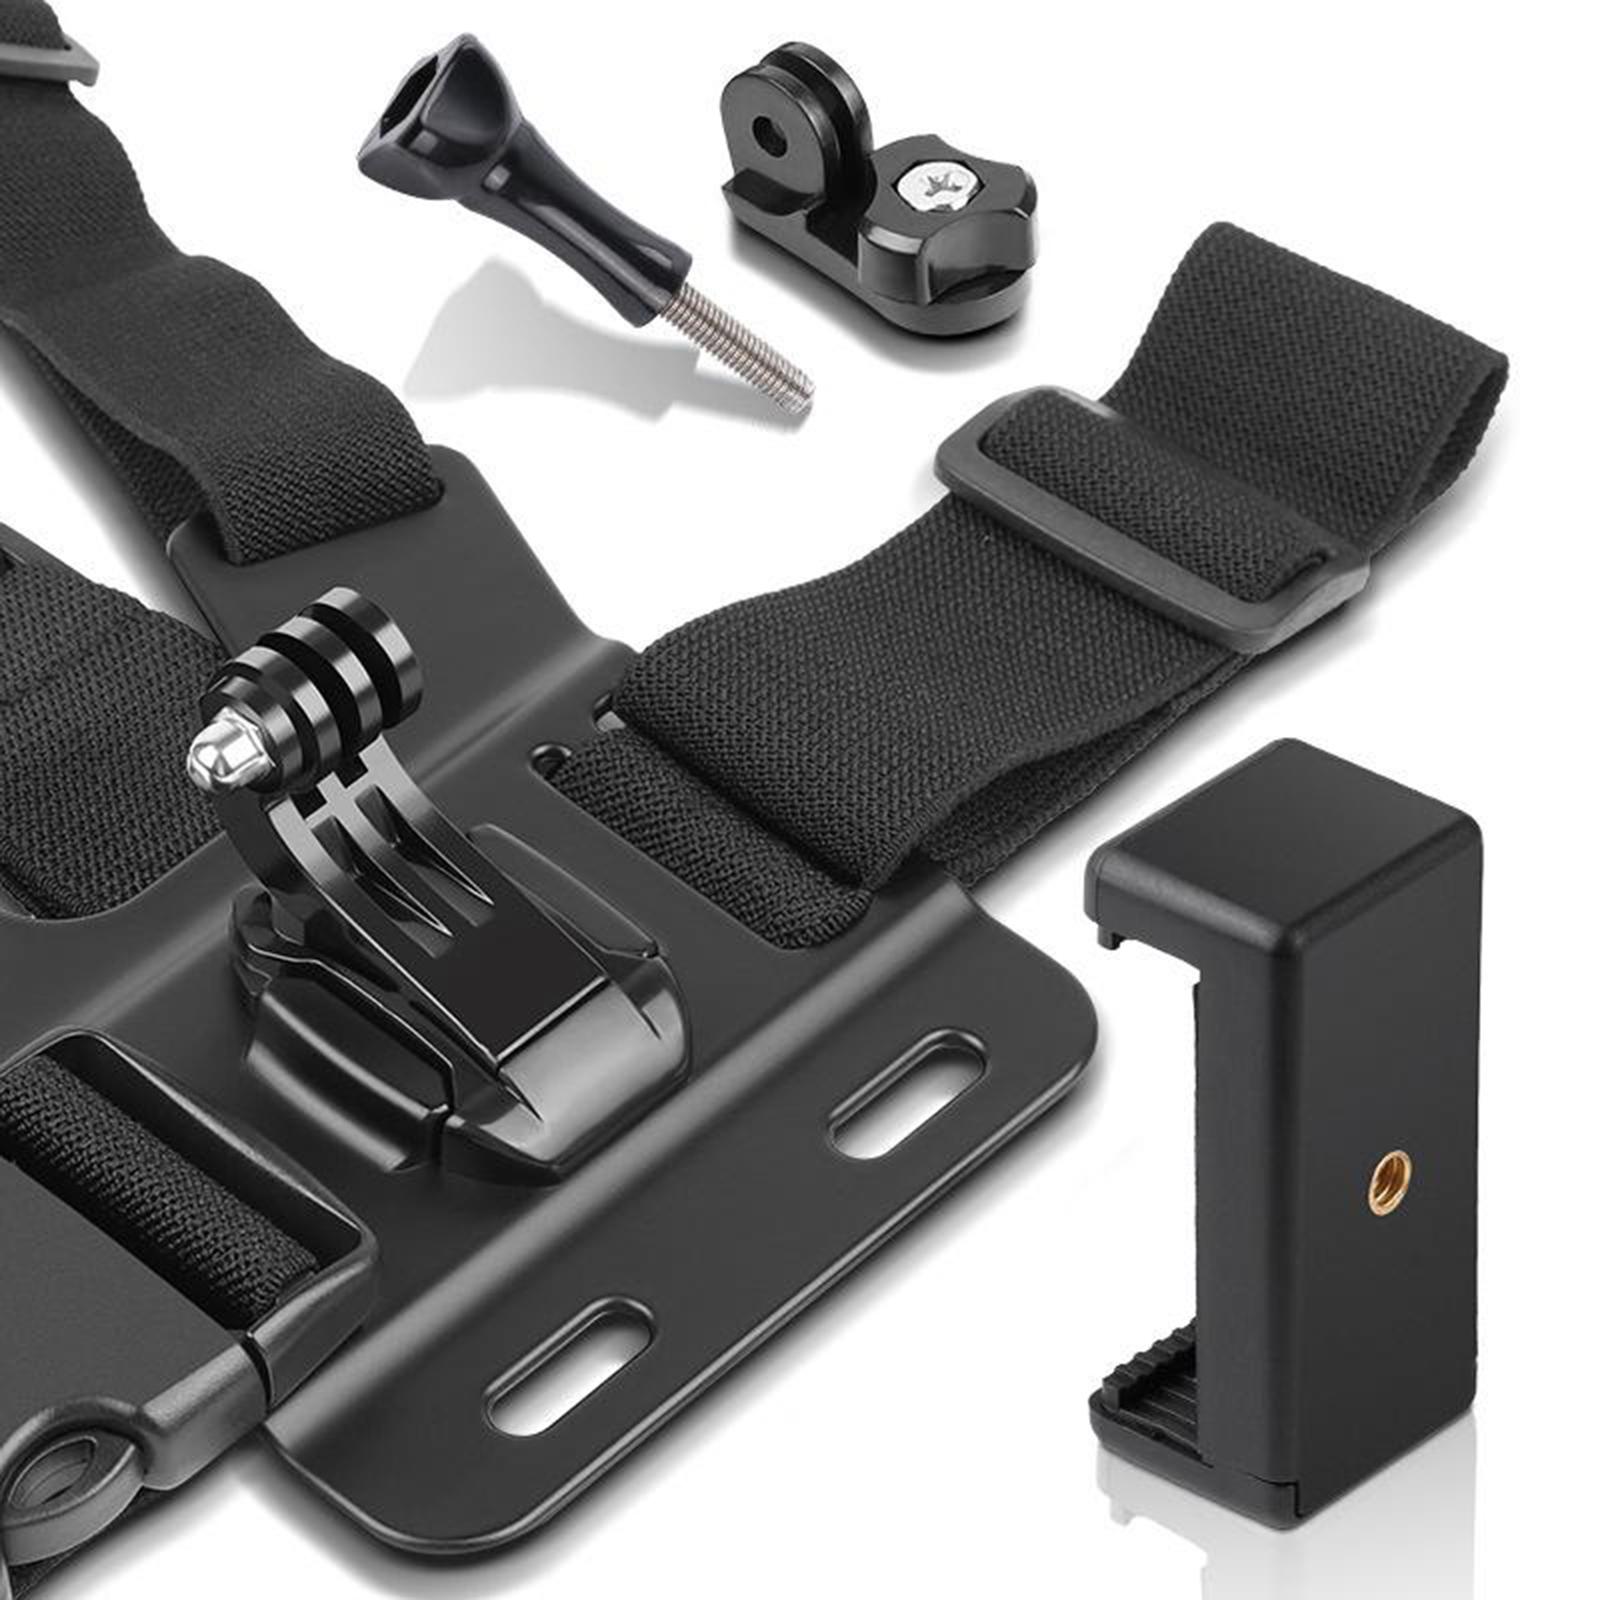 Smartphone Adjustable Chest Fixed Strap Mount Bracket with Cell Phone Clip